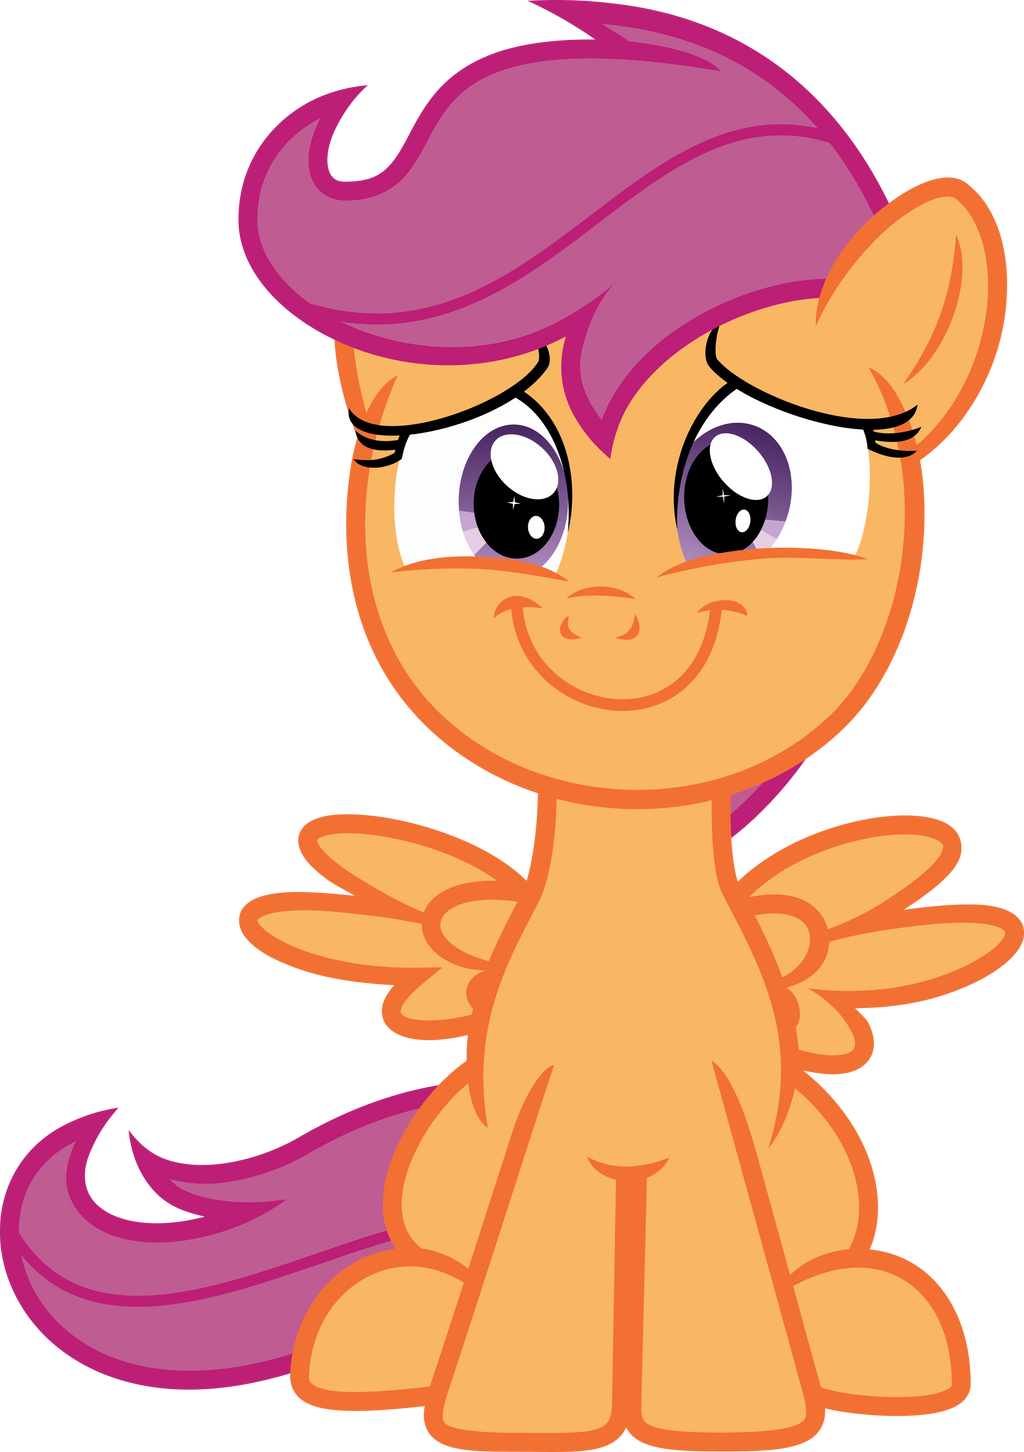 scootaloo_by_korsoo_dd0imgx-fullview.png